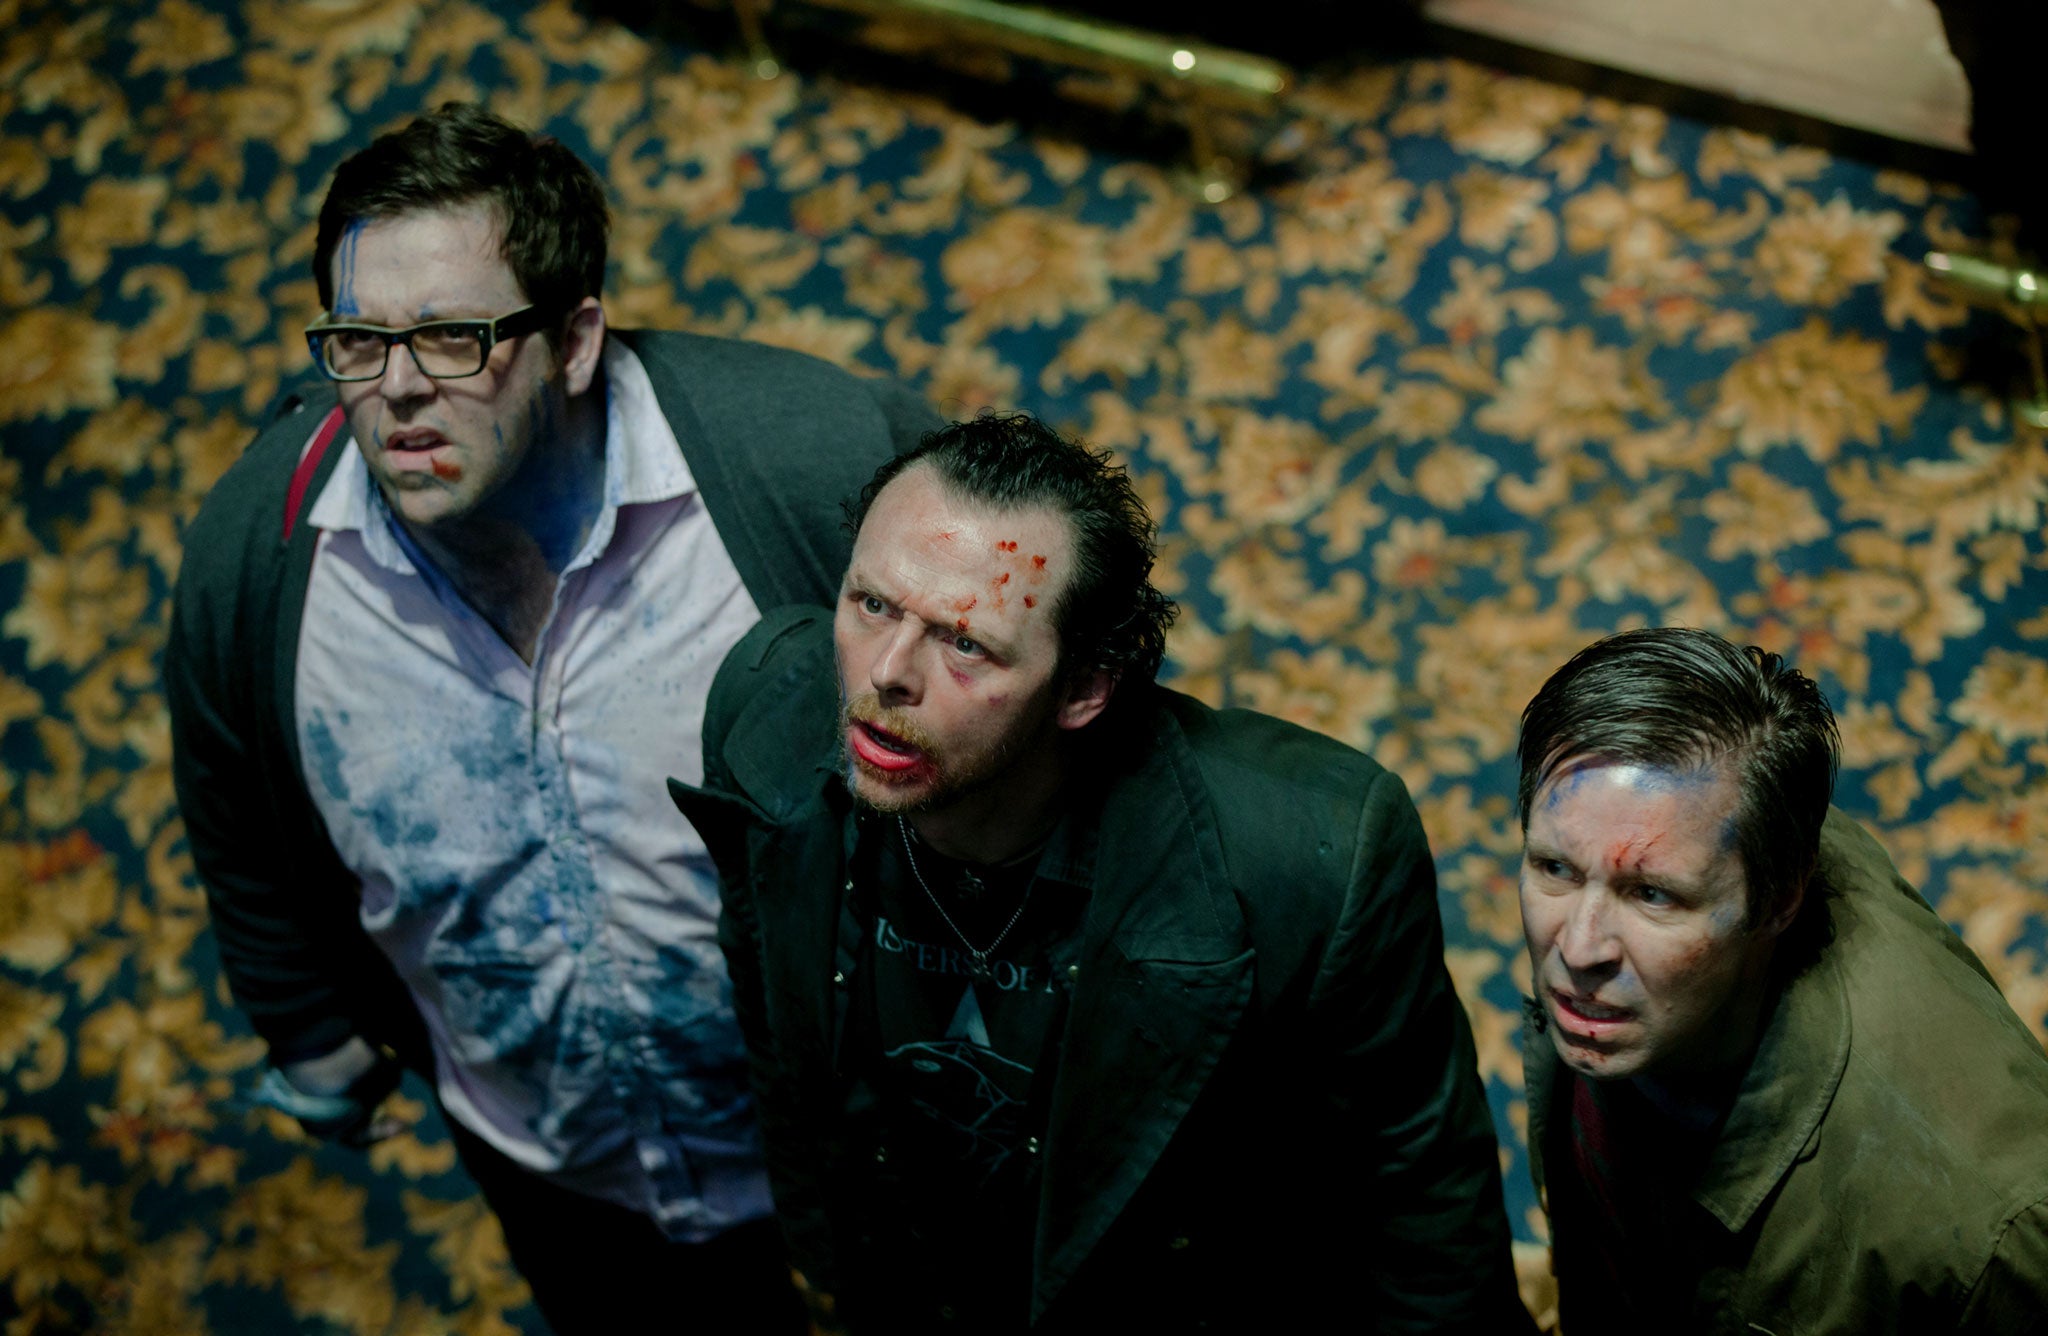 With Nick Frost and Paddy Considine in 'The World's End'